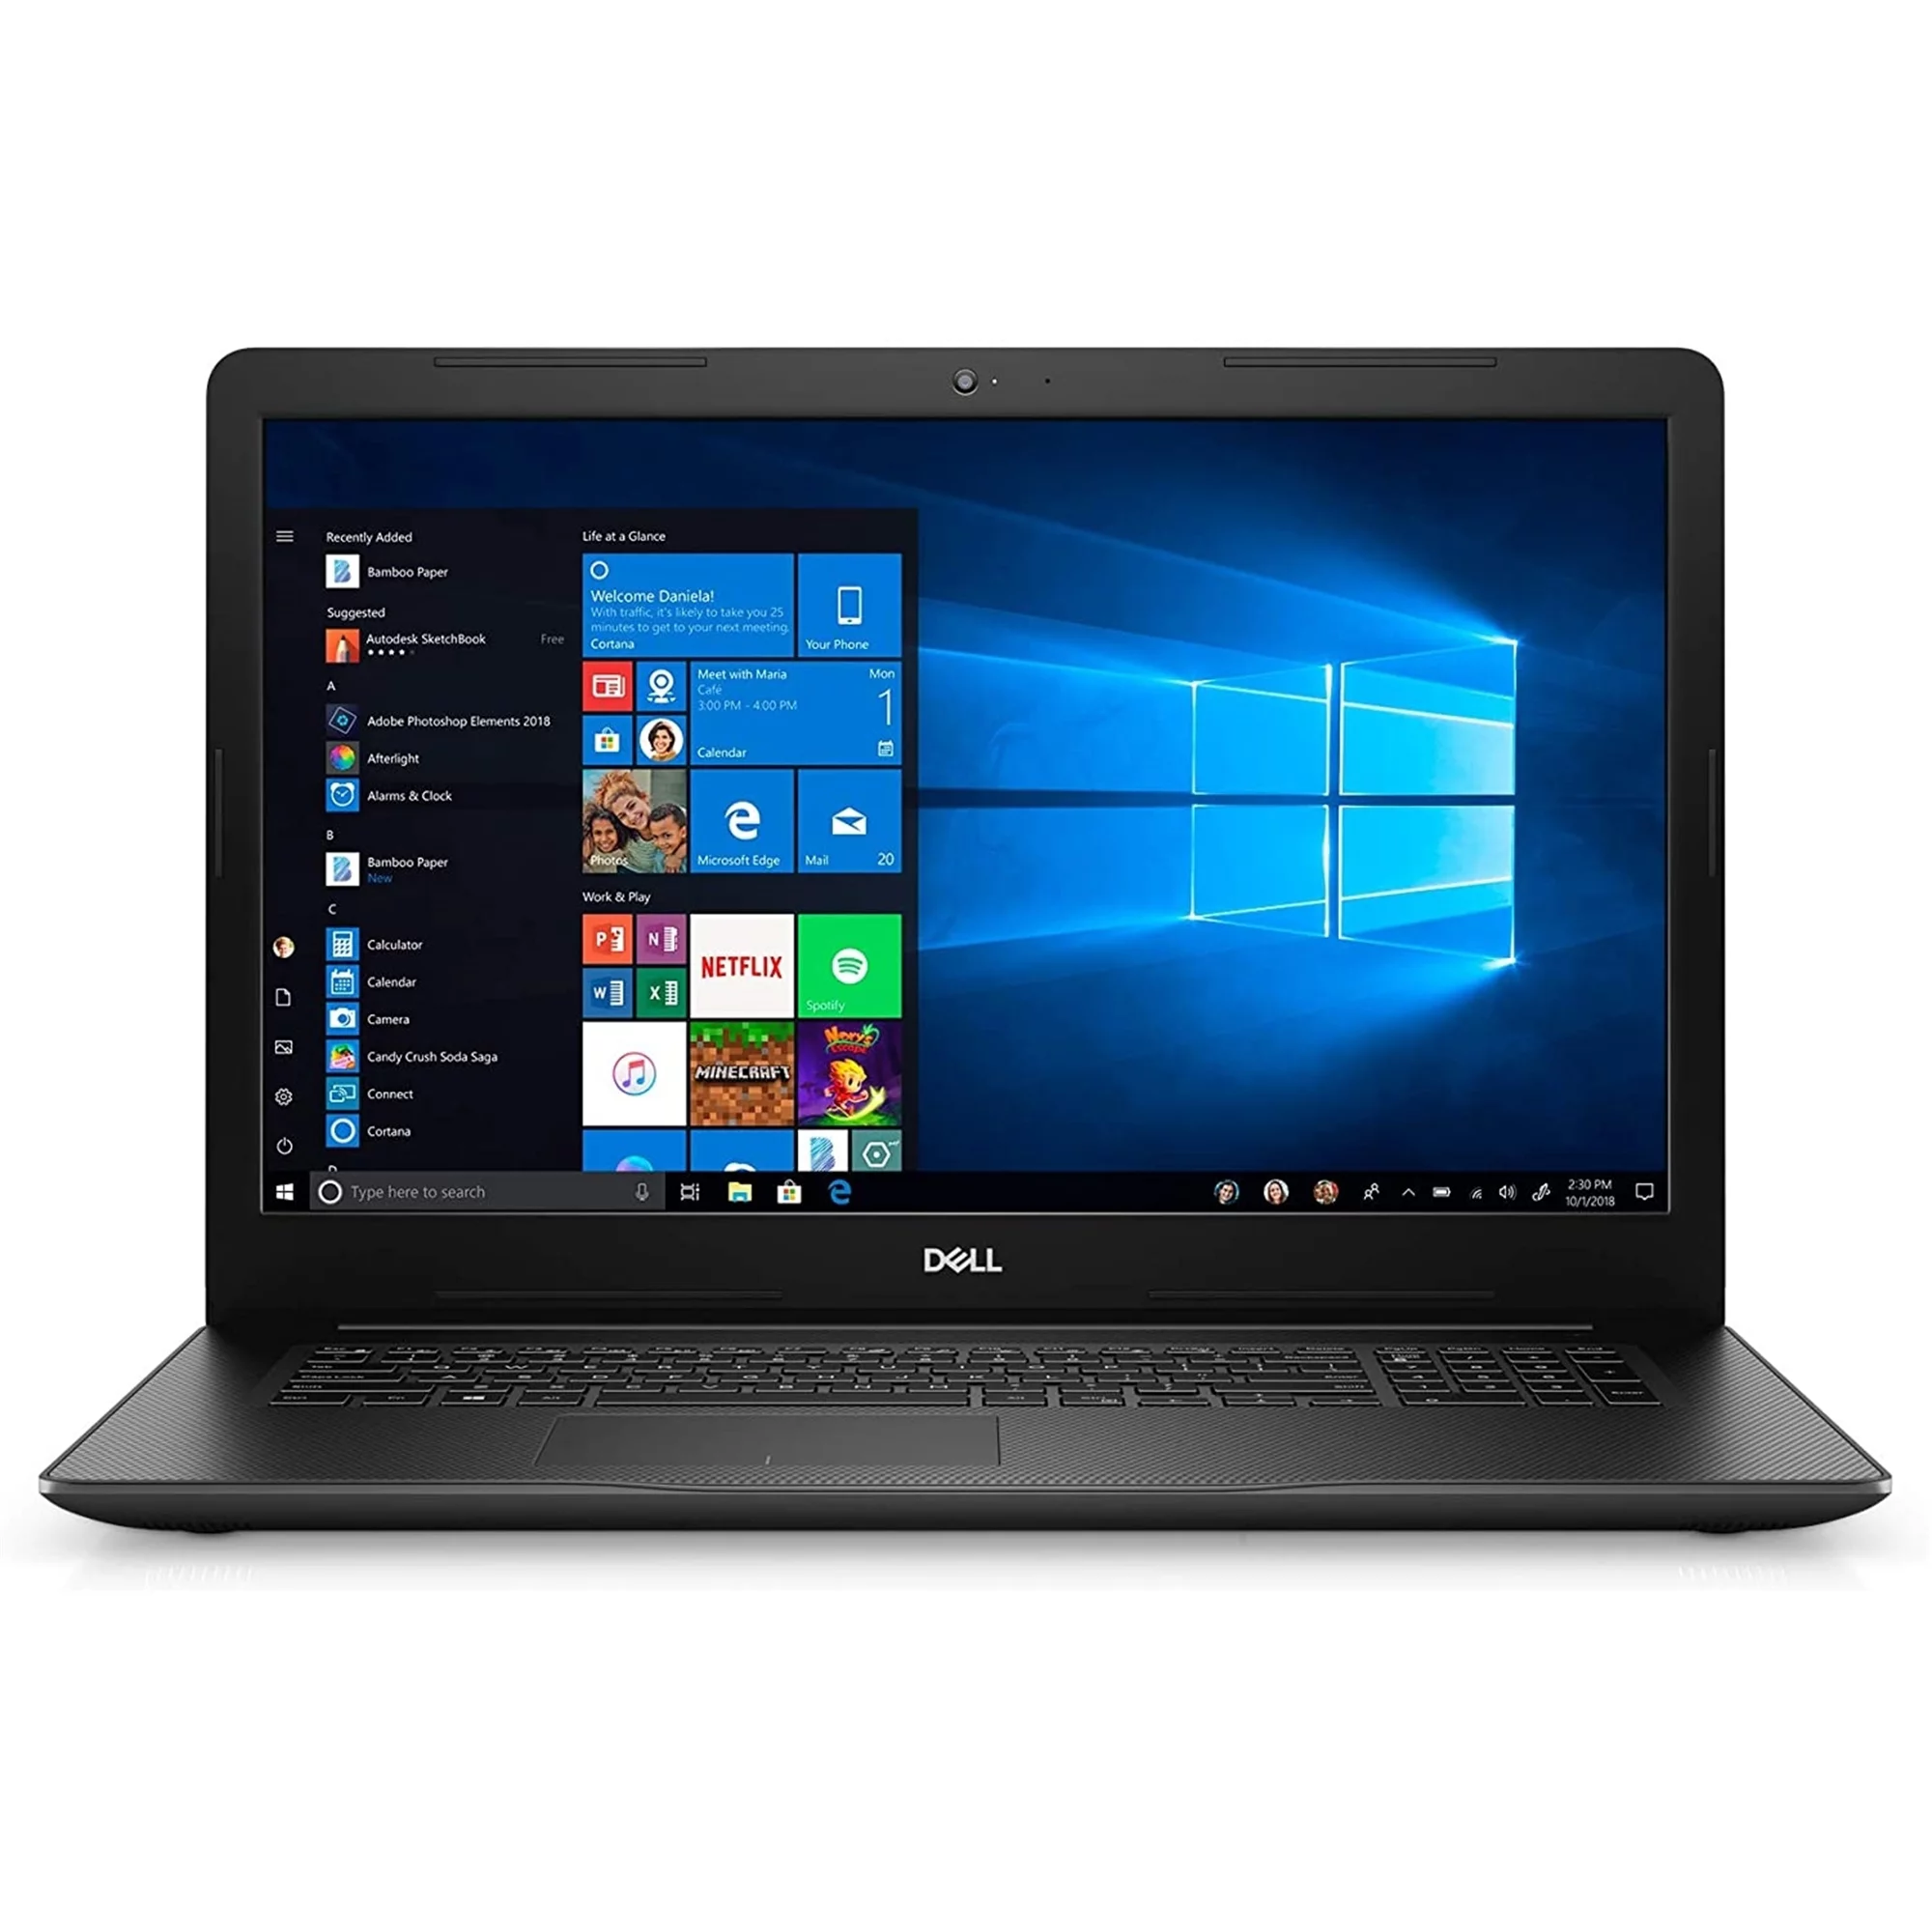 Dell Inspiron 17 3790 Notebook